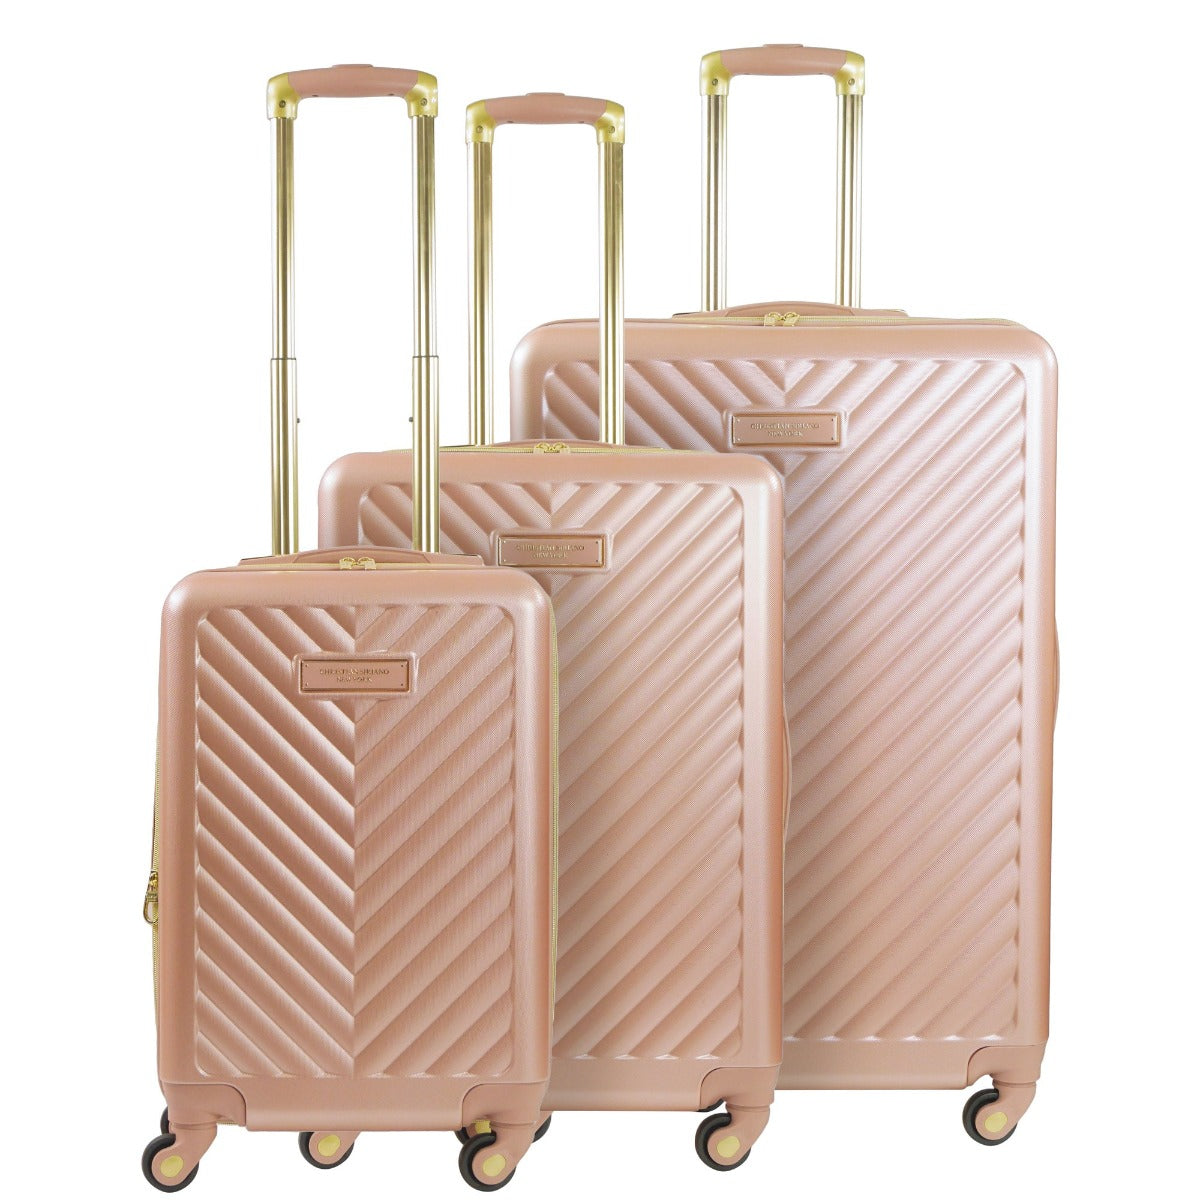 Christian Siriano New York Addie rose gold 3 piece hardside spinner suitcase set - best durable luggage sets